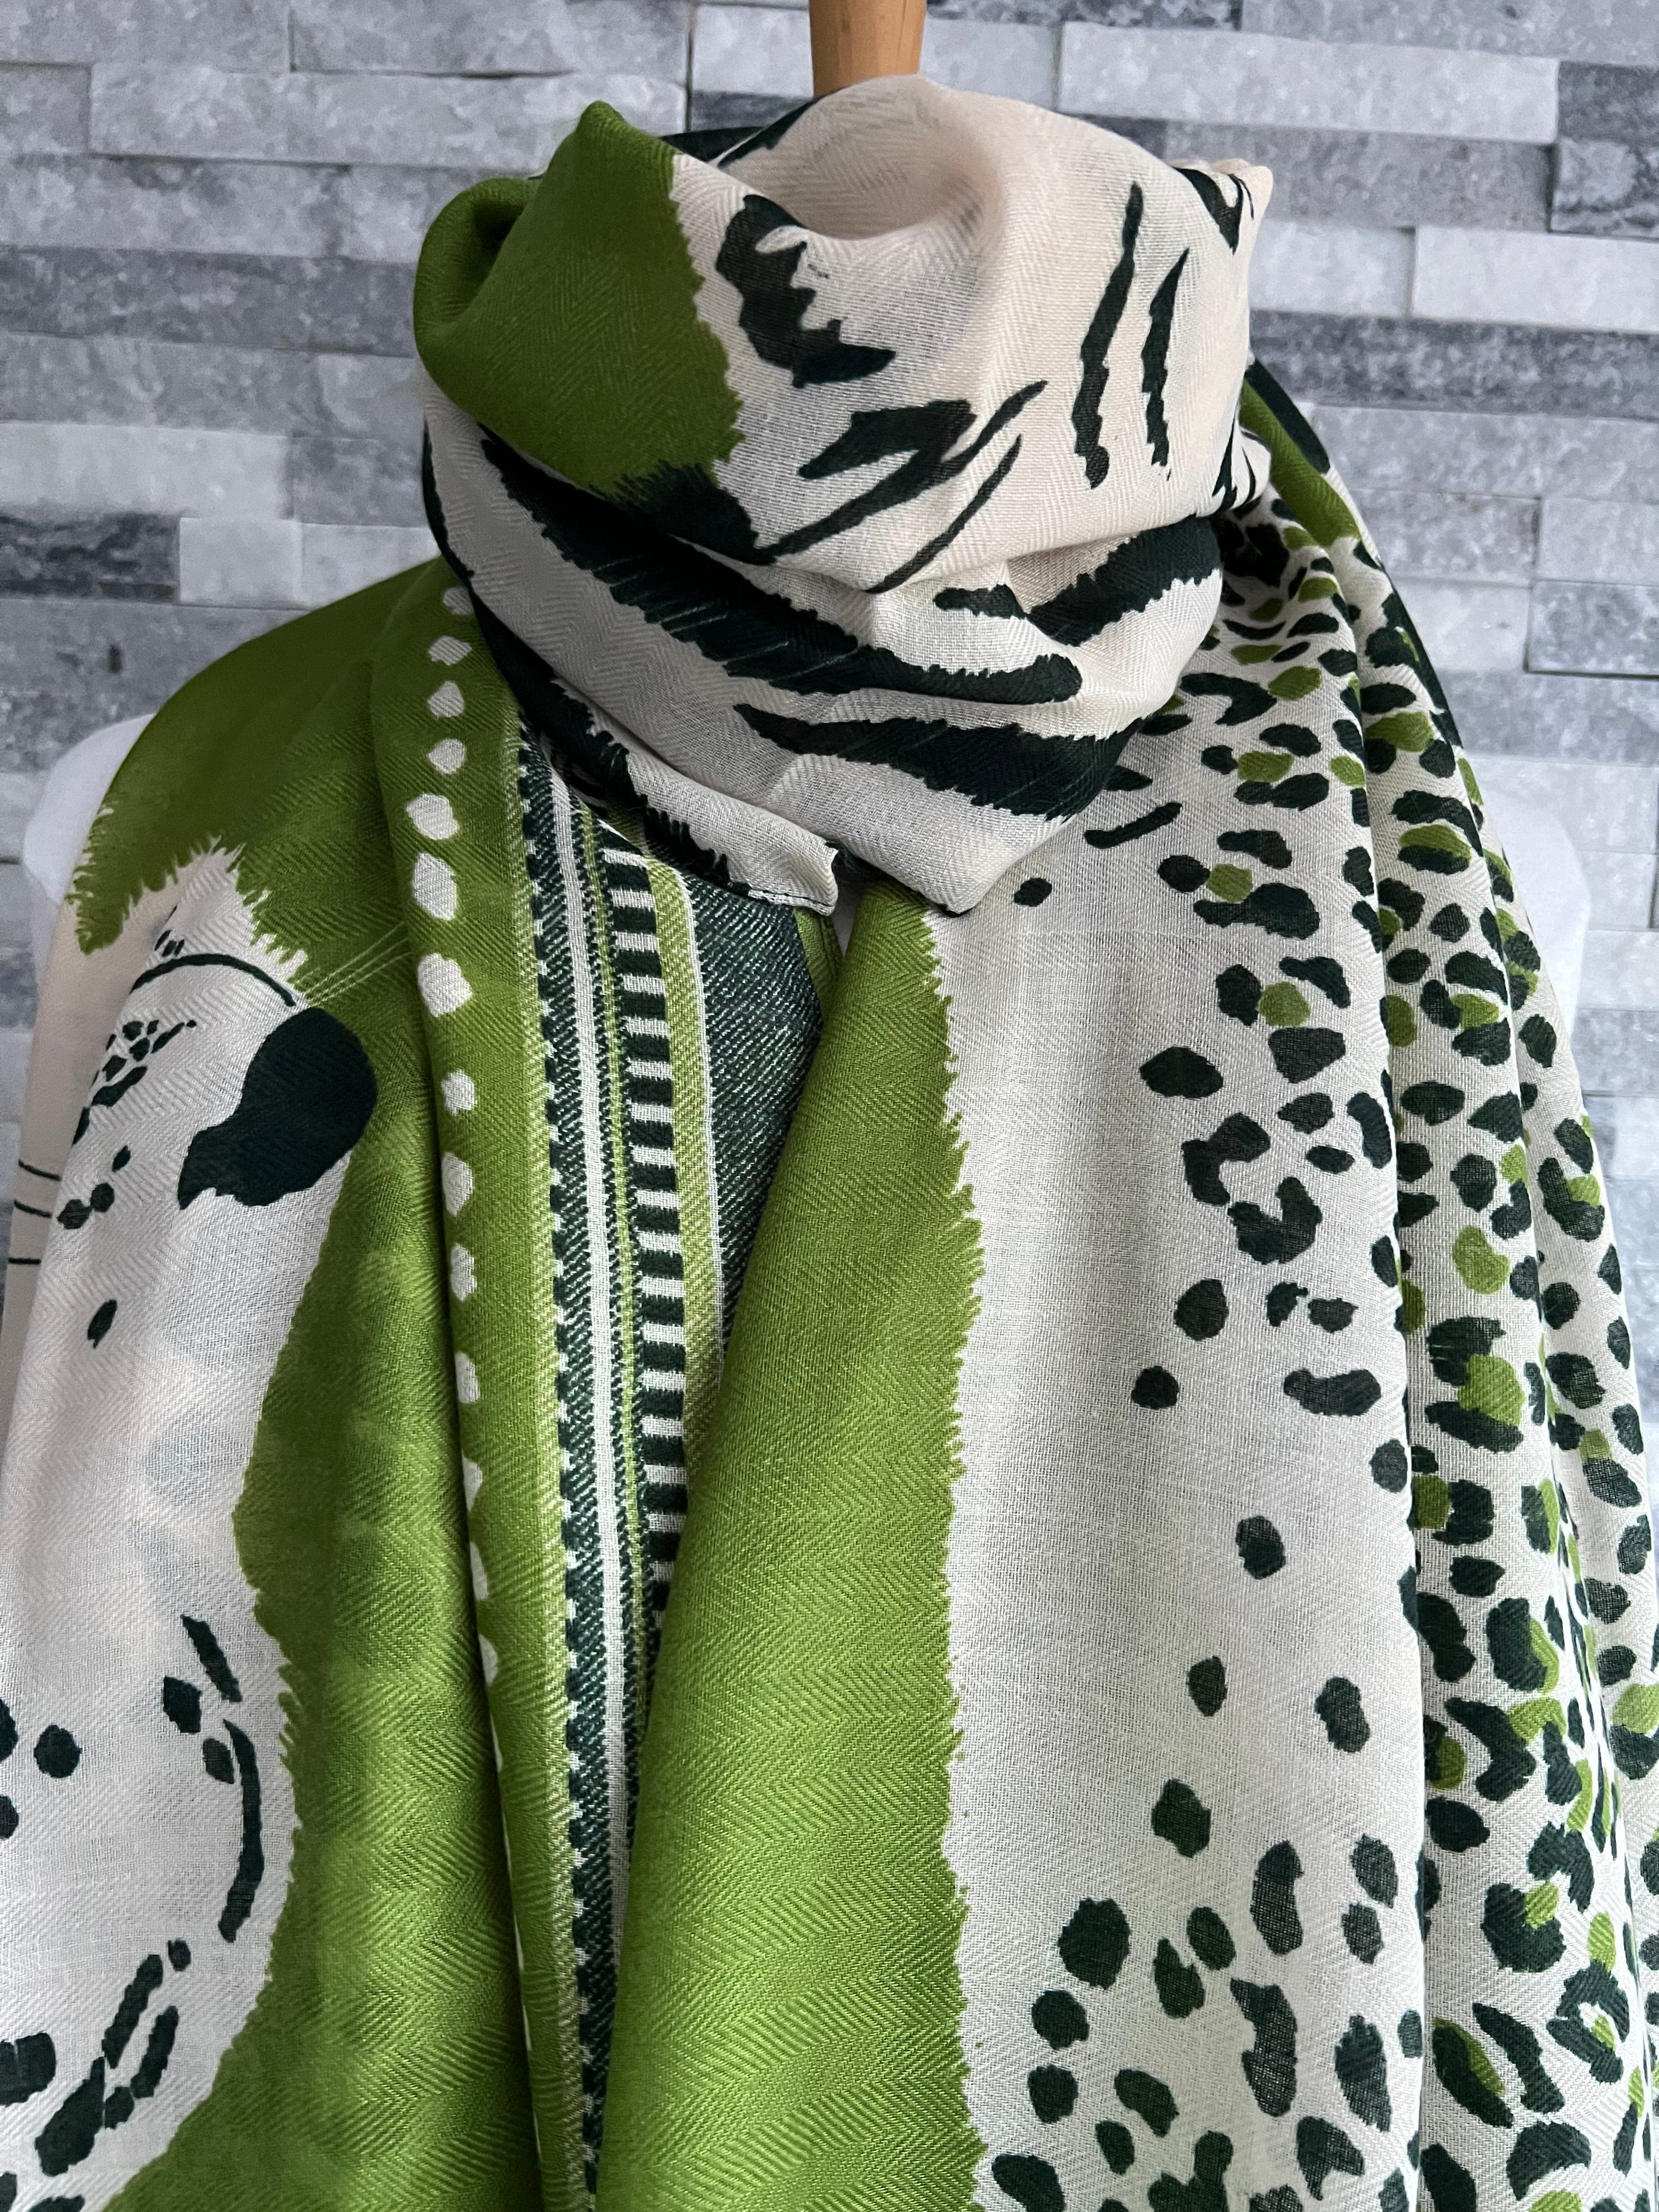 lusciousscarves Scarves Green Tiger & Leopard Animal Print Scarf